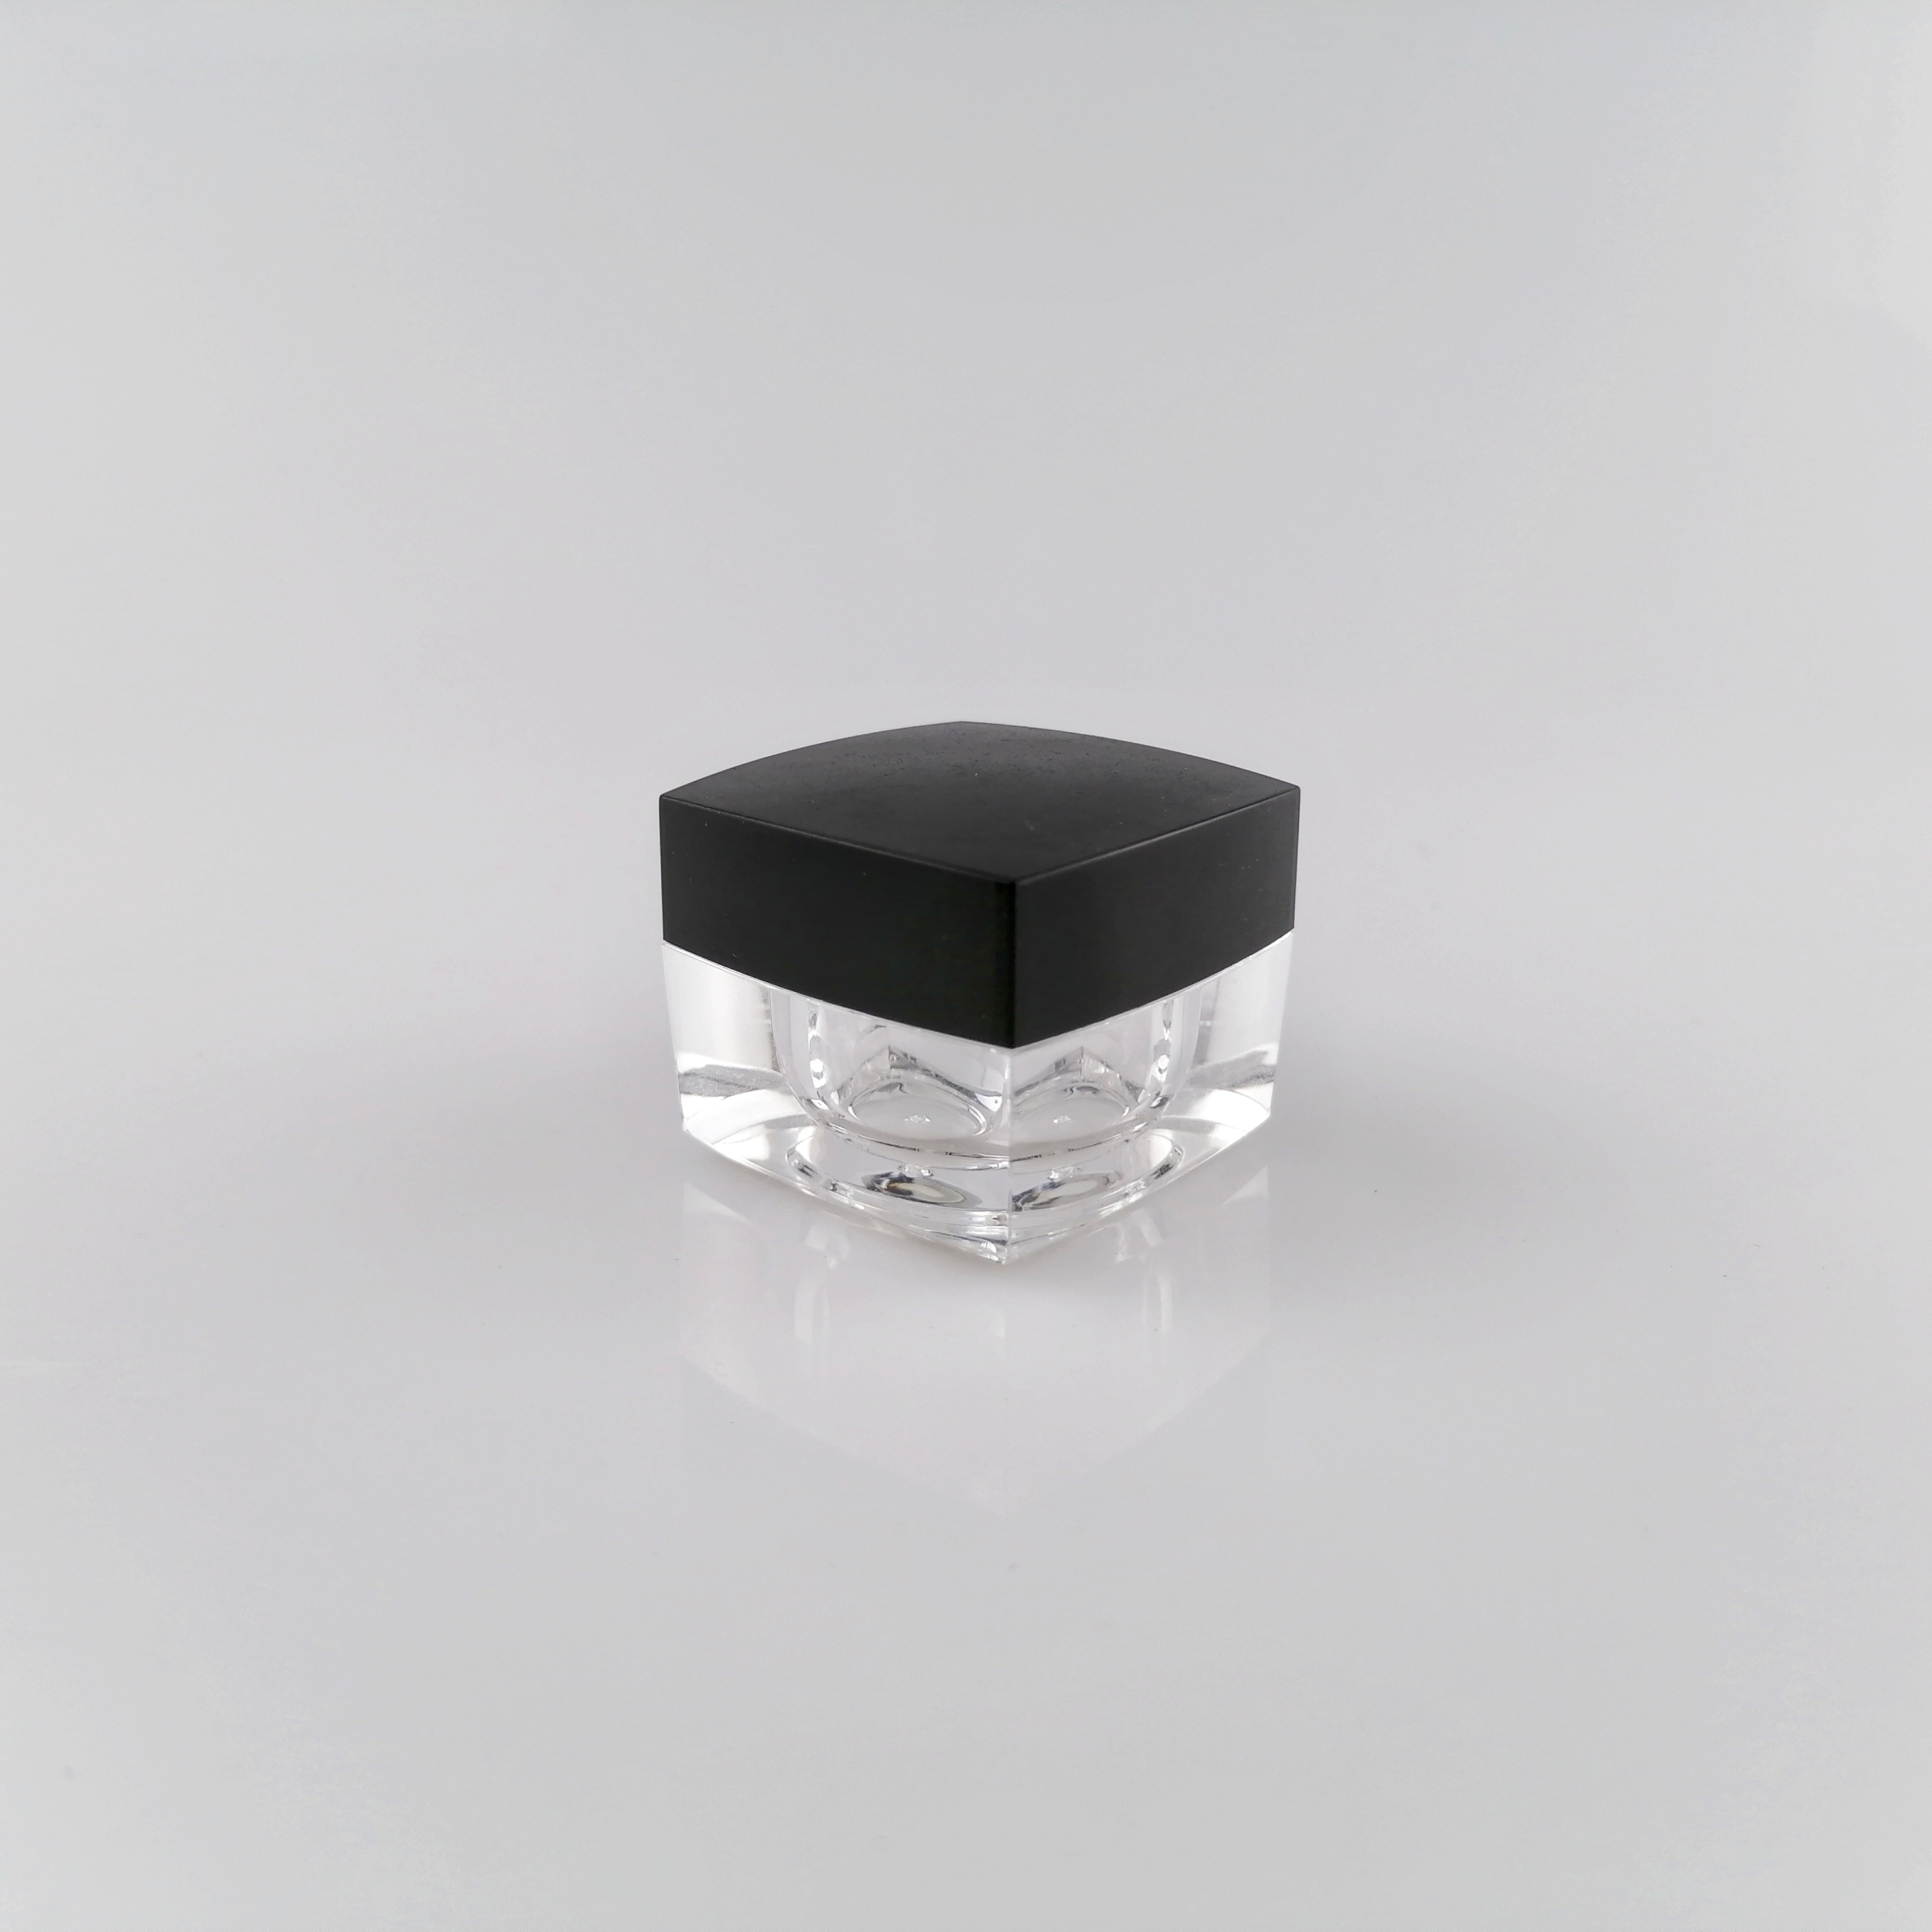 Square Frosted Silver Cream Cosmetic Jar 5g